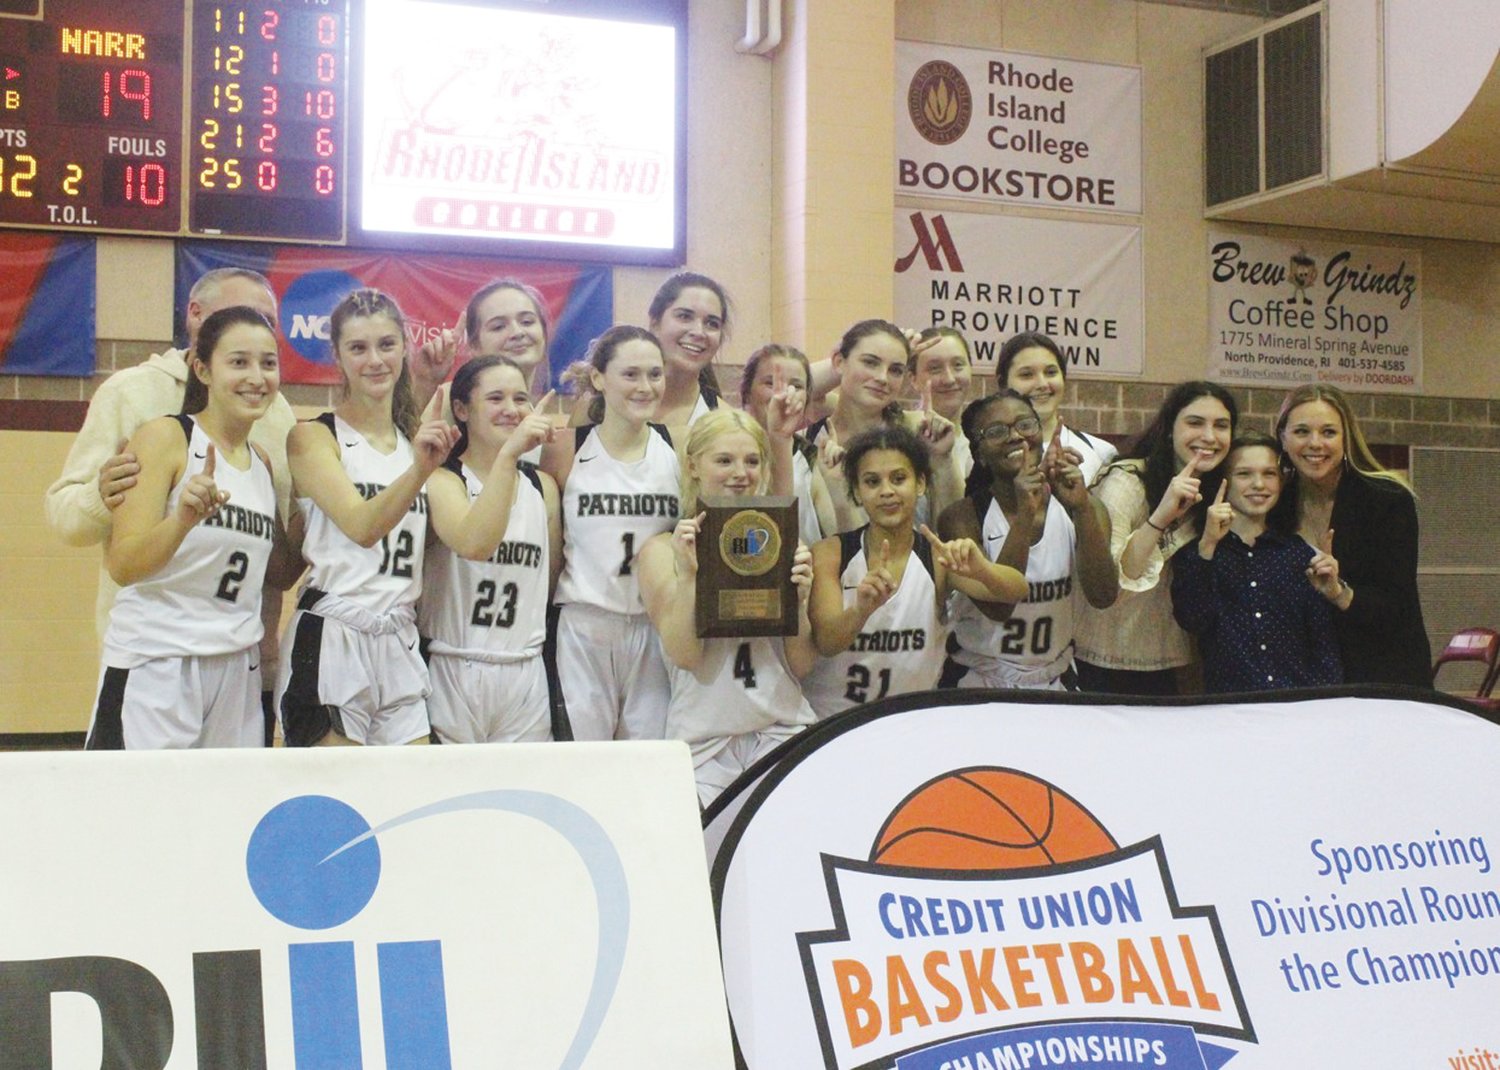 CHAMPS: The Pilgrim girls basketball team after winning the Division III Championship. (Photos by Alex Sponseller)